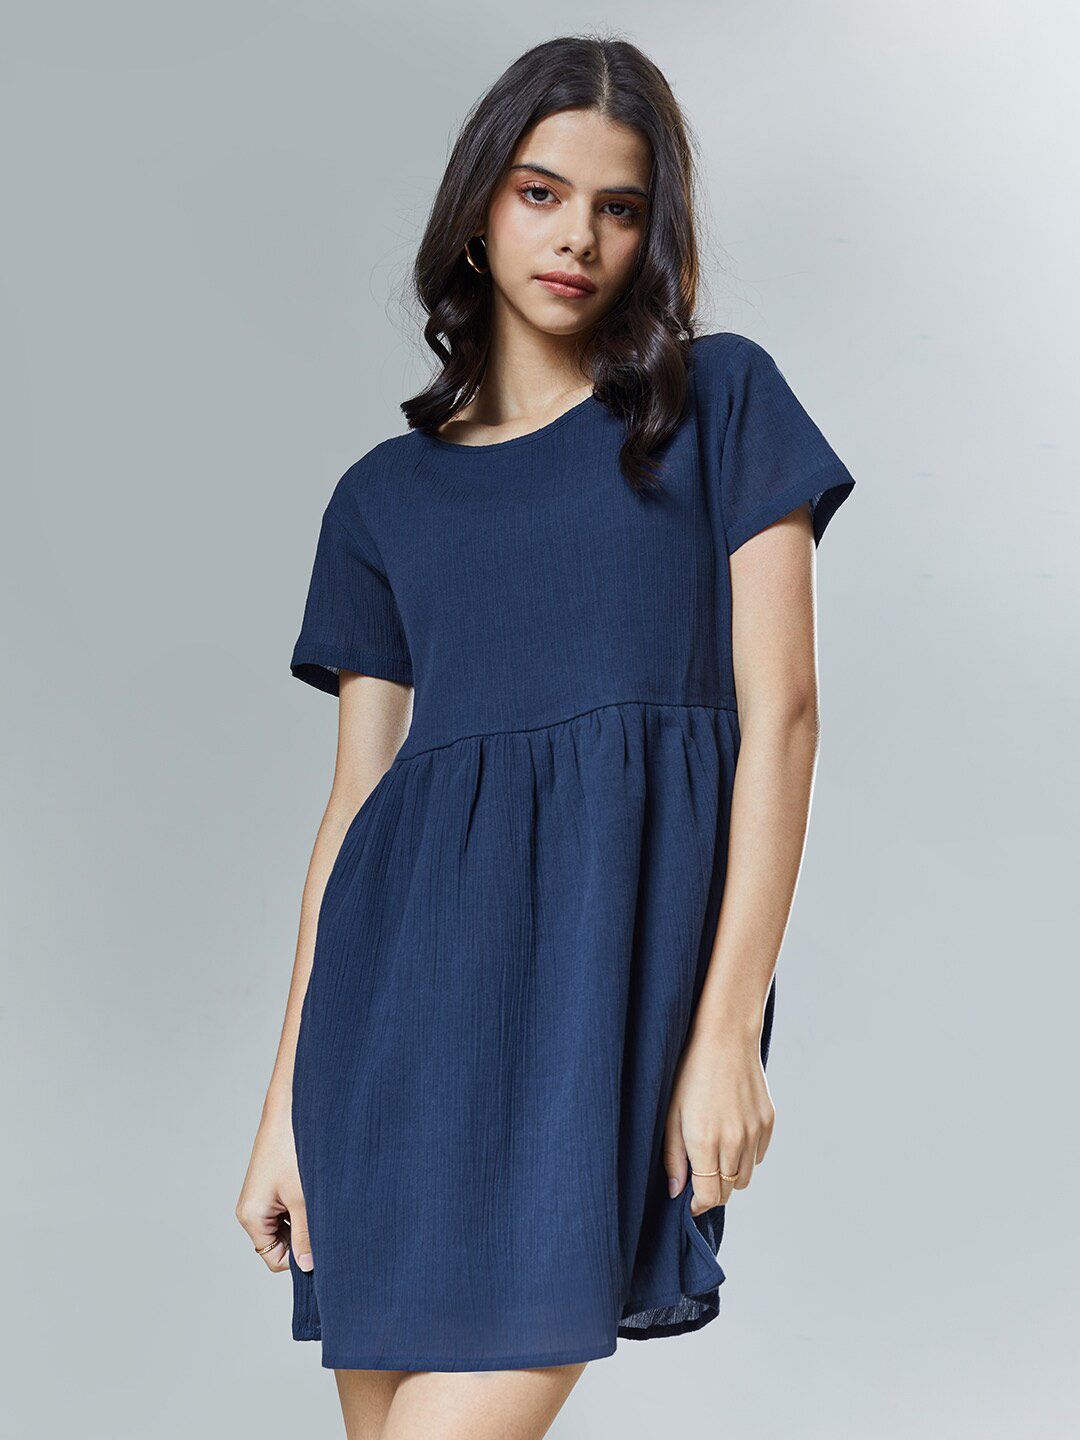 The Souled Store Navy Blue Dress Price in India